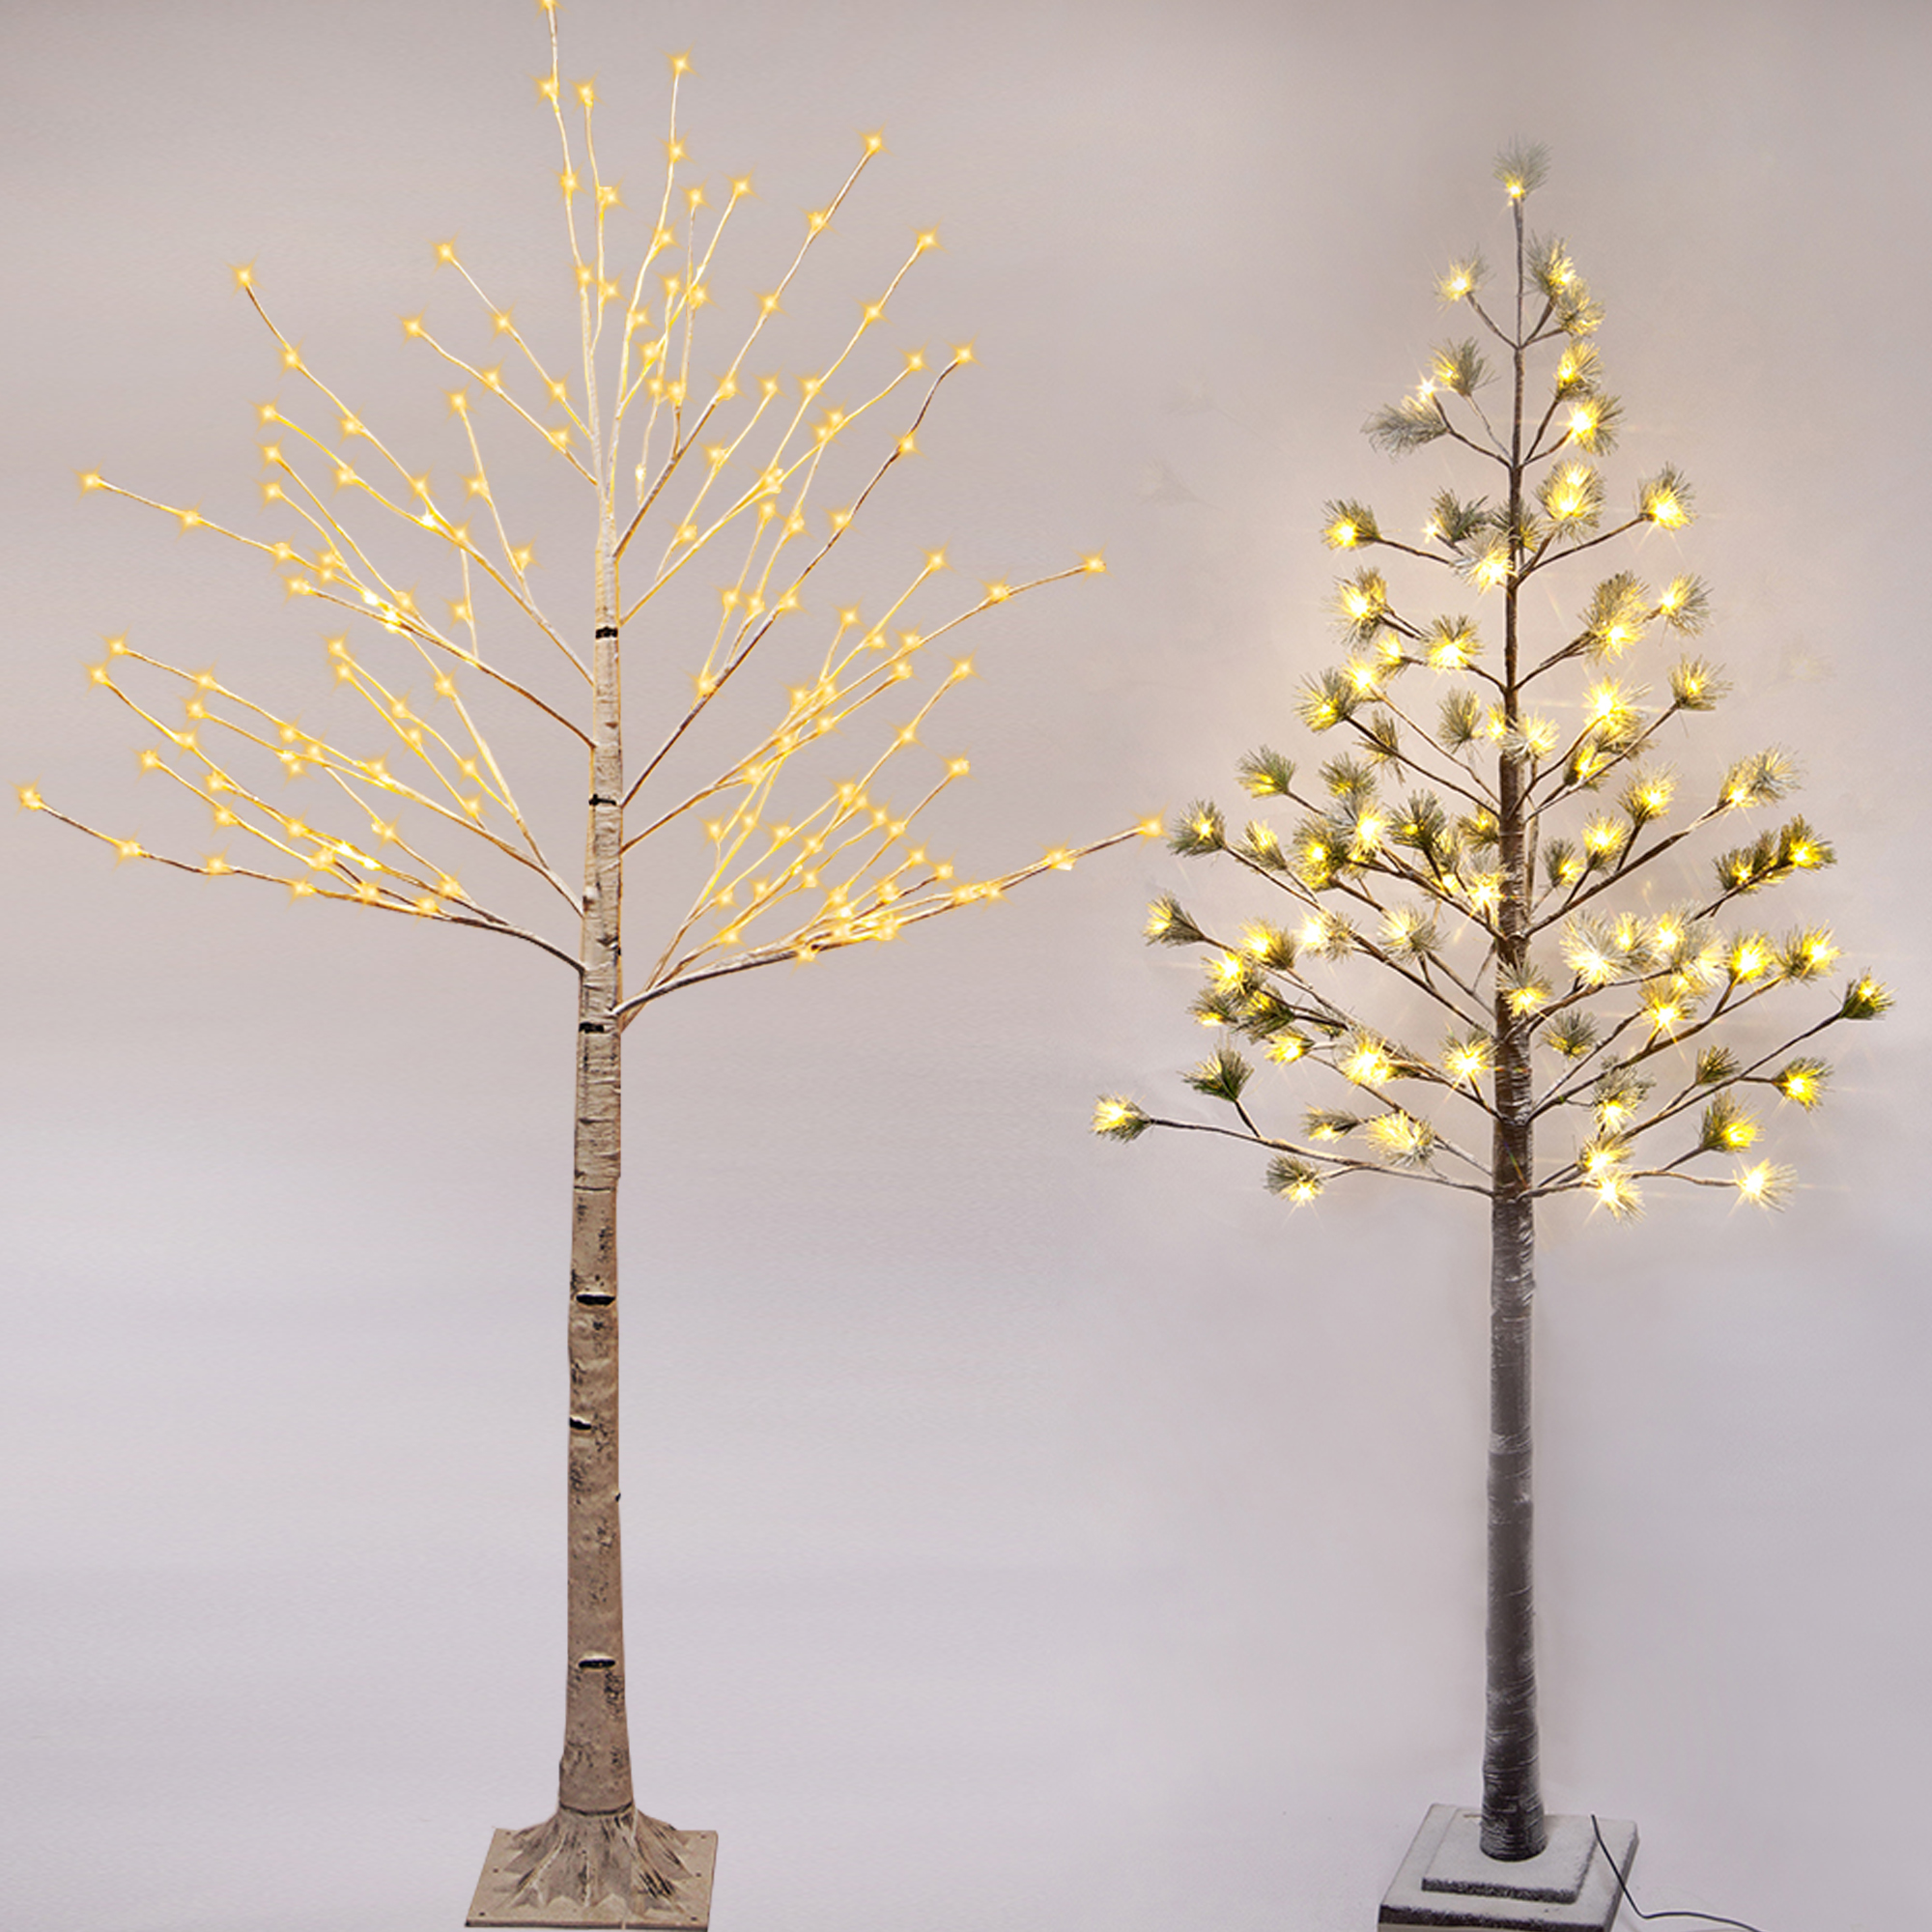 Buy a Combo pack of 7 ft height Pre-lite LED Birch Tree with 6 ft height Pine Tree